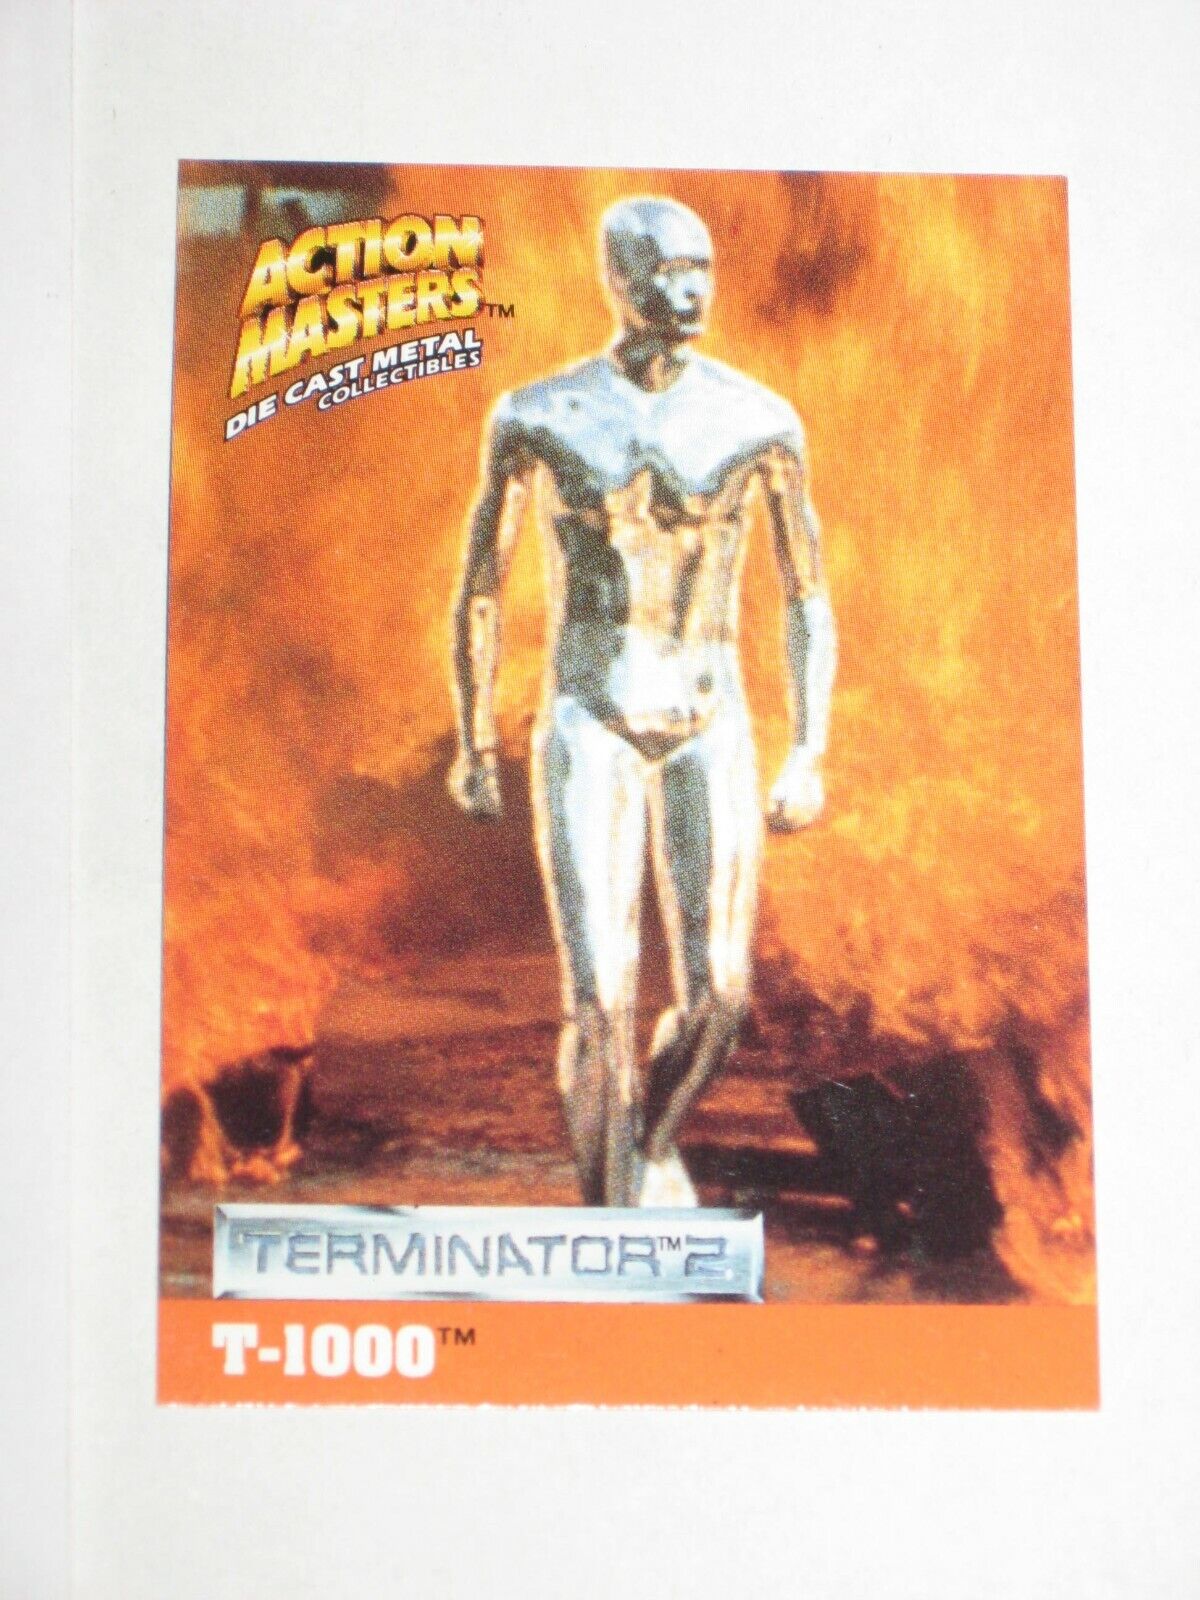 1994 TERMINATOR 2 T-1000 ACTION MASTERS KENNER PROMO CARD CYBERNET RARE